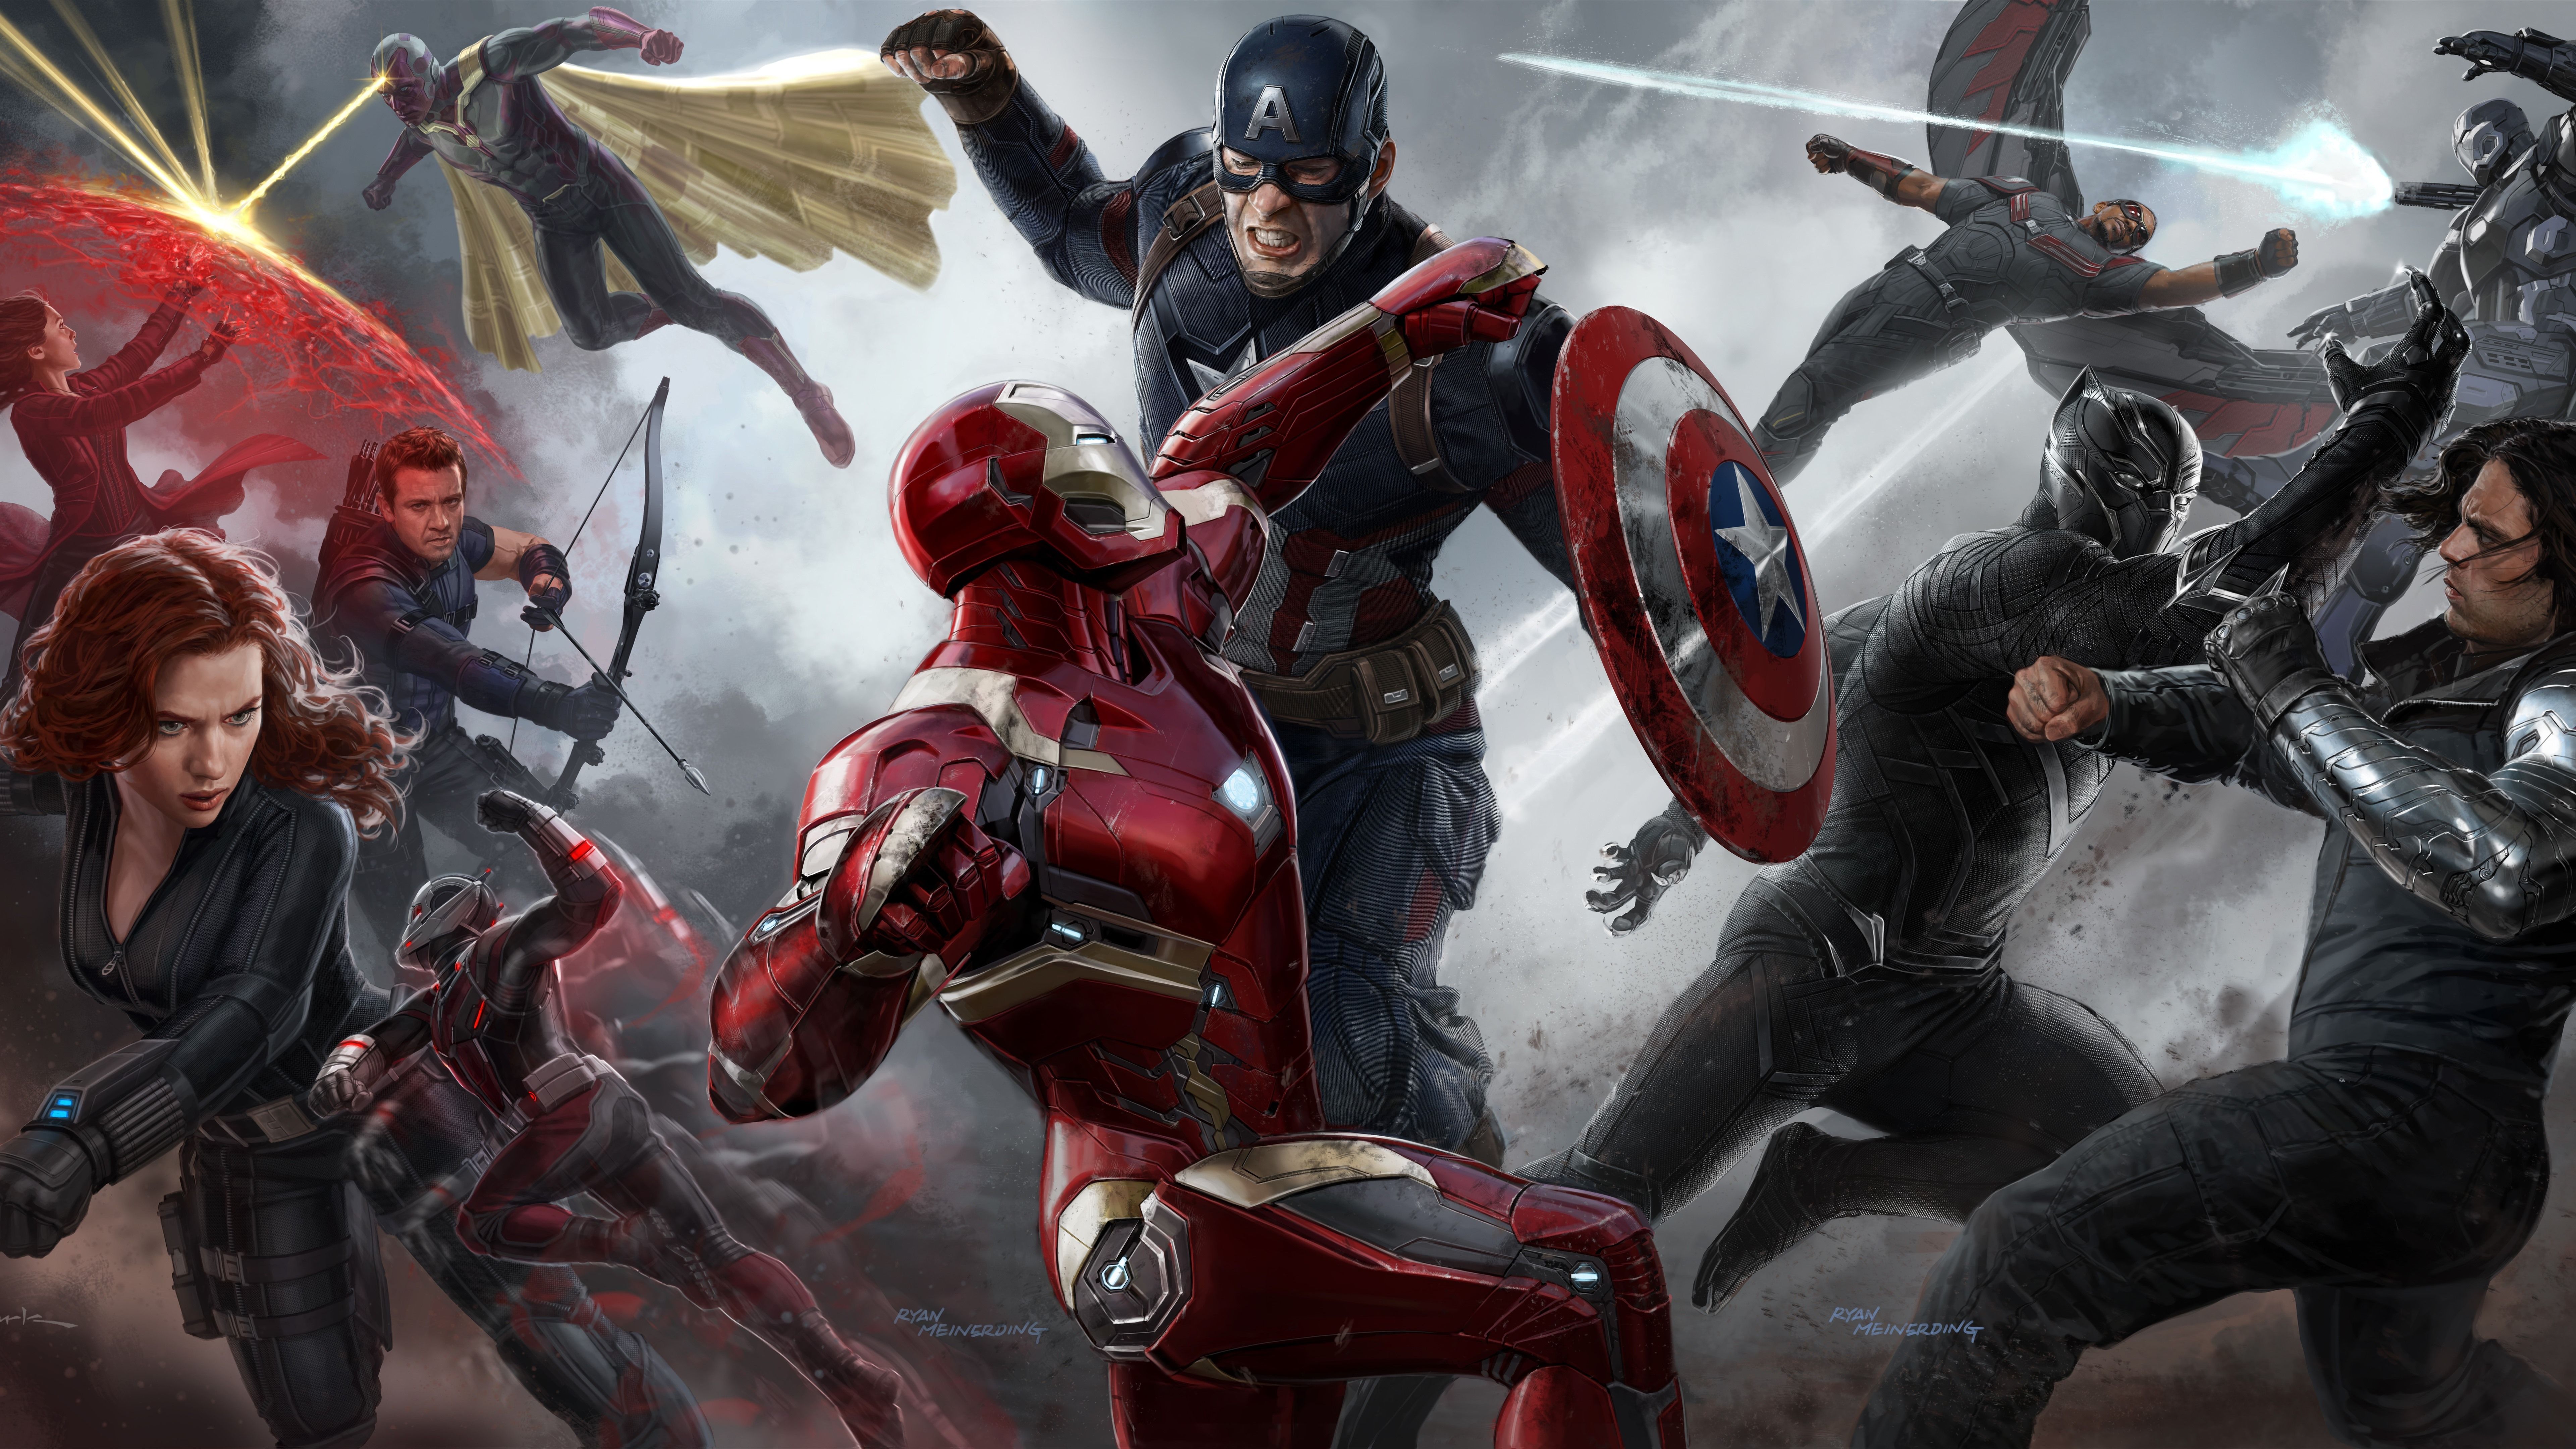 Wallpaper The Avengers, superheroes, art picture, Marvel movie 7680x4320 UHD 8K Picture, Image